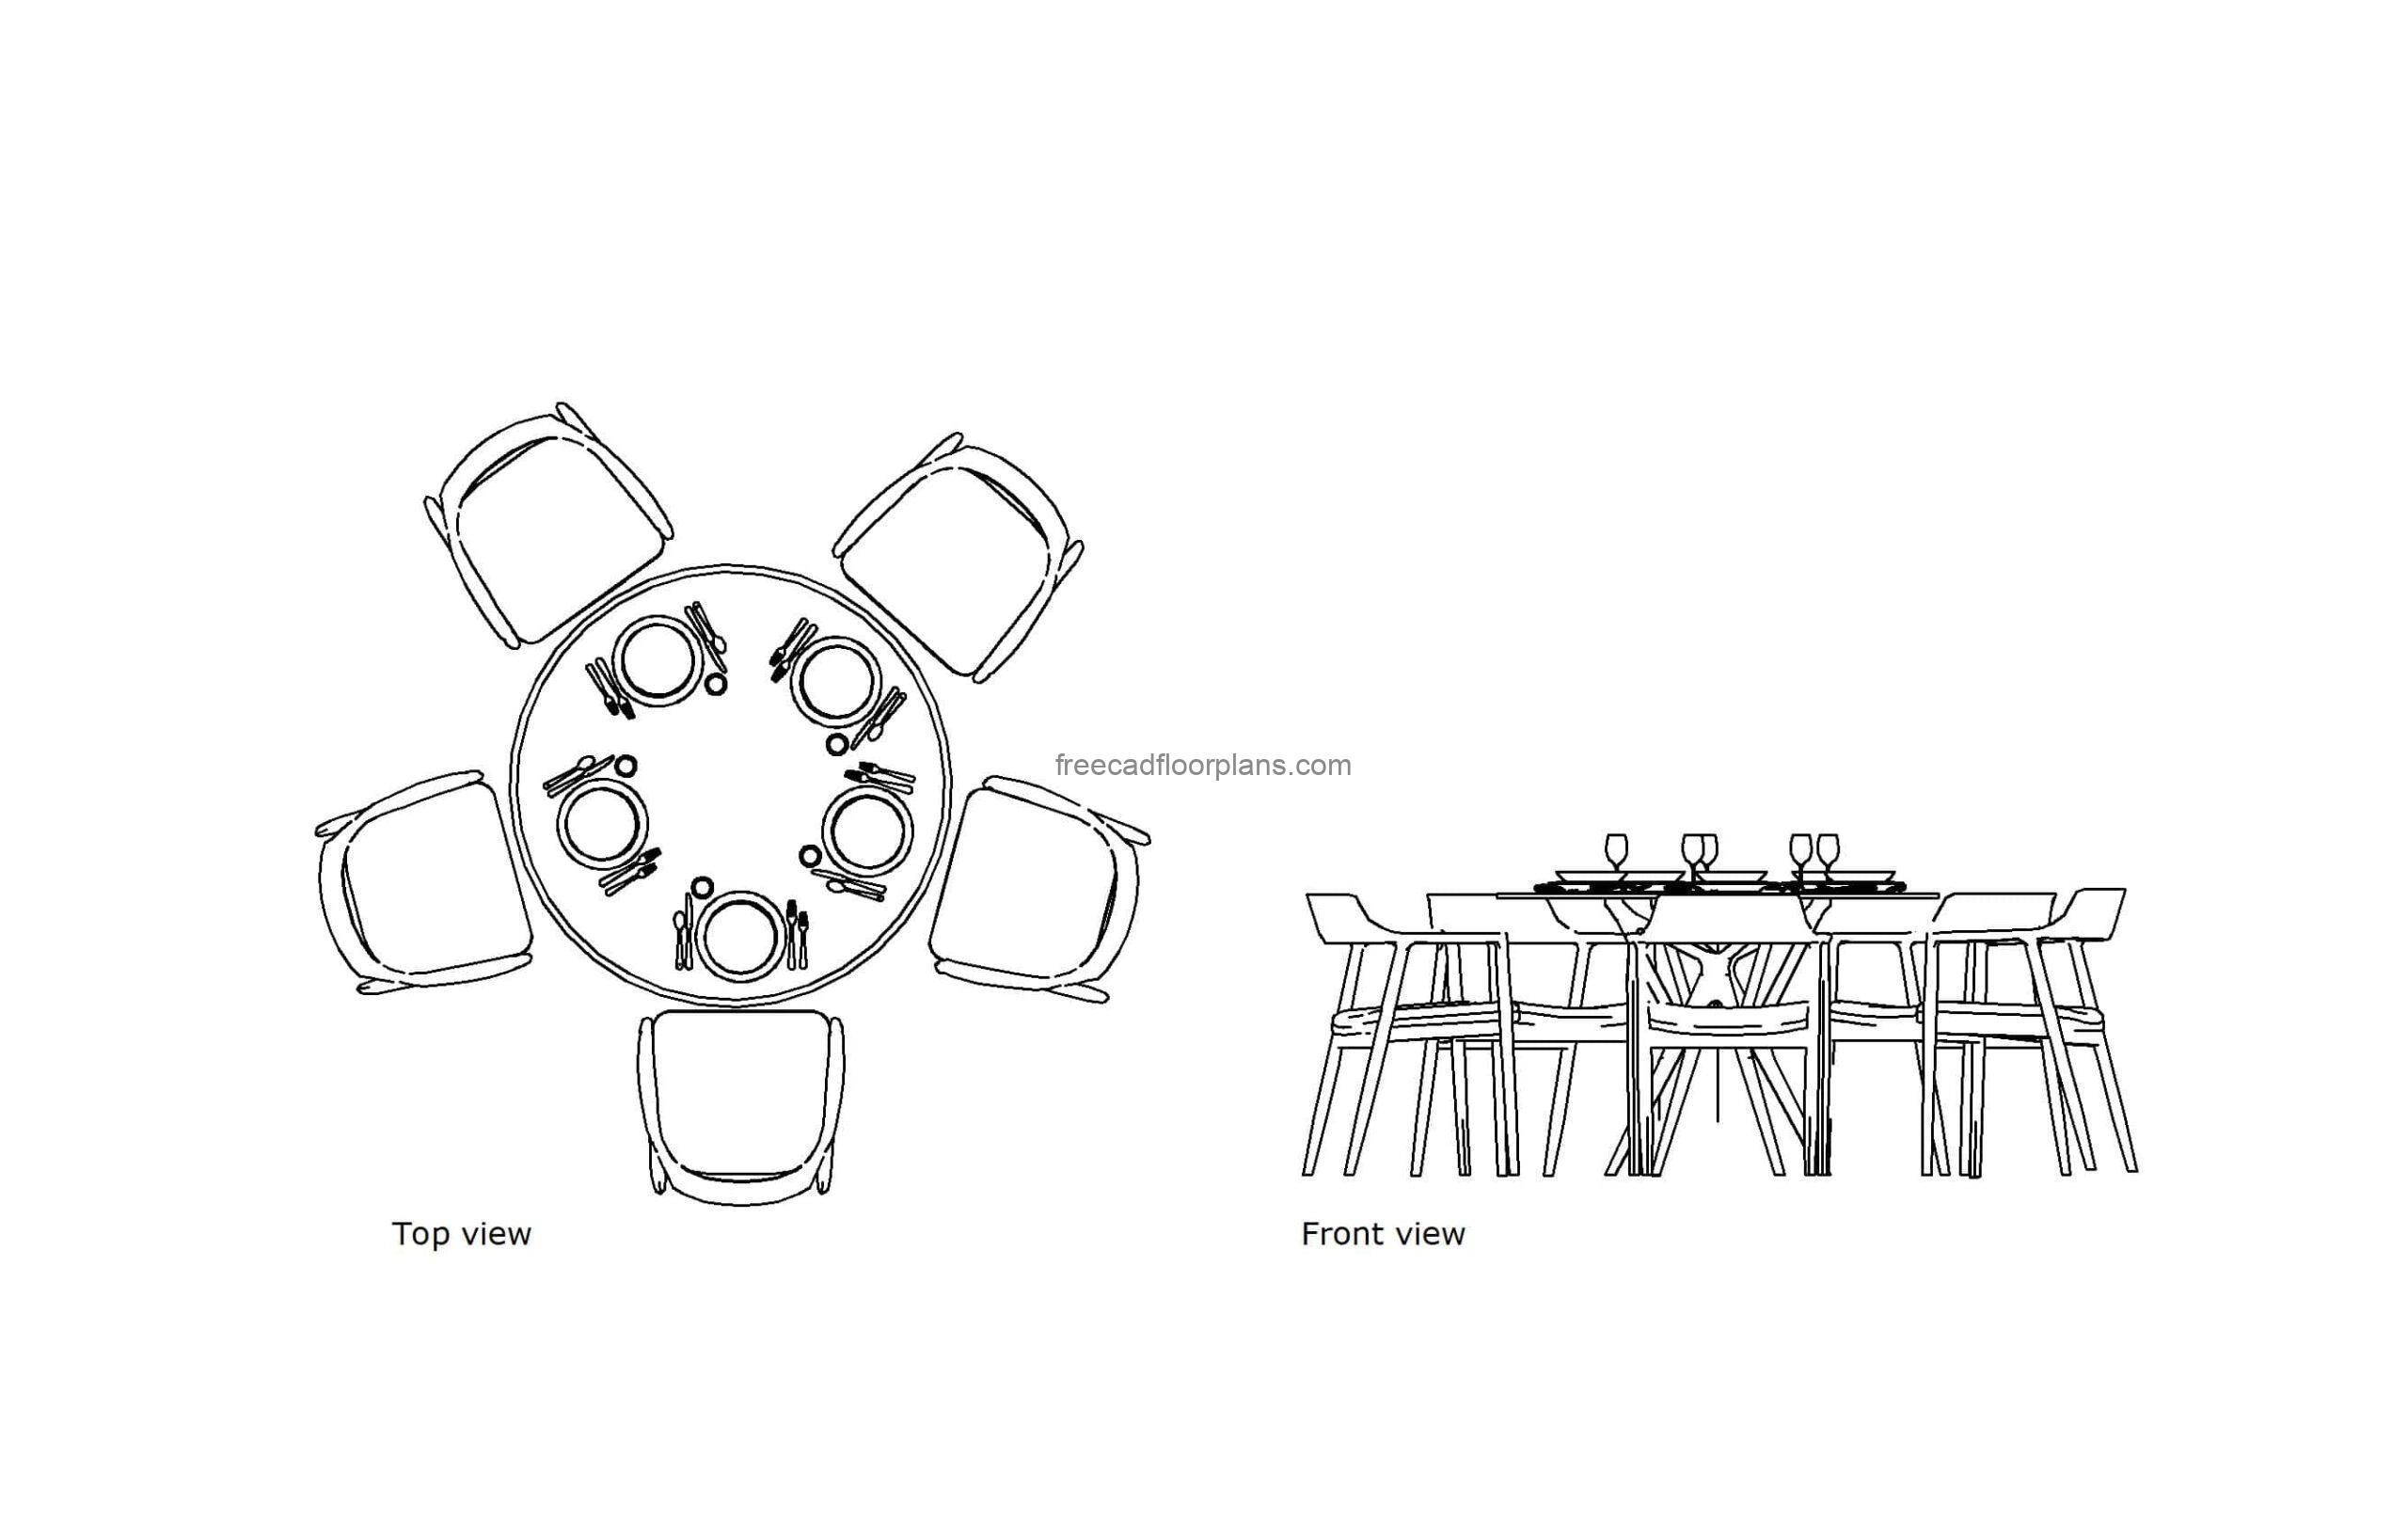 autocad drawing of a round table with 5 seats, plan and elevation 2d views, dwg file free for download